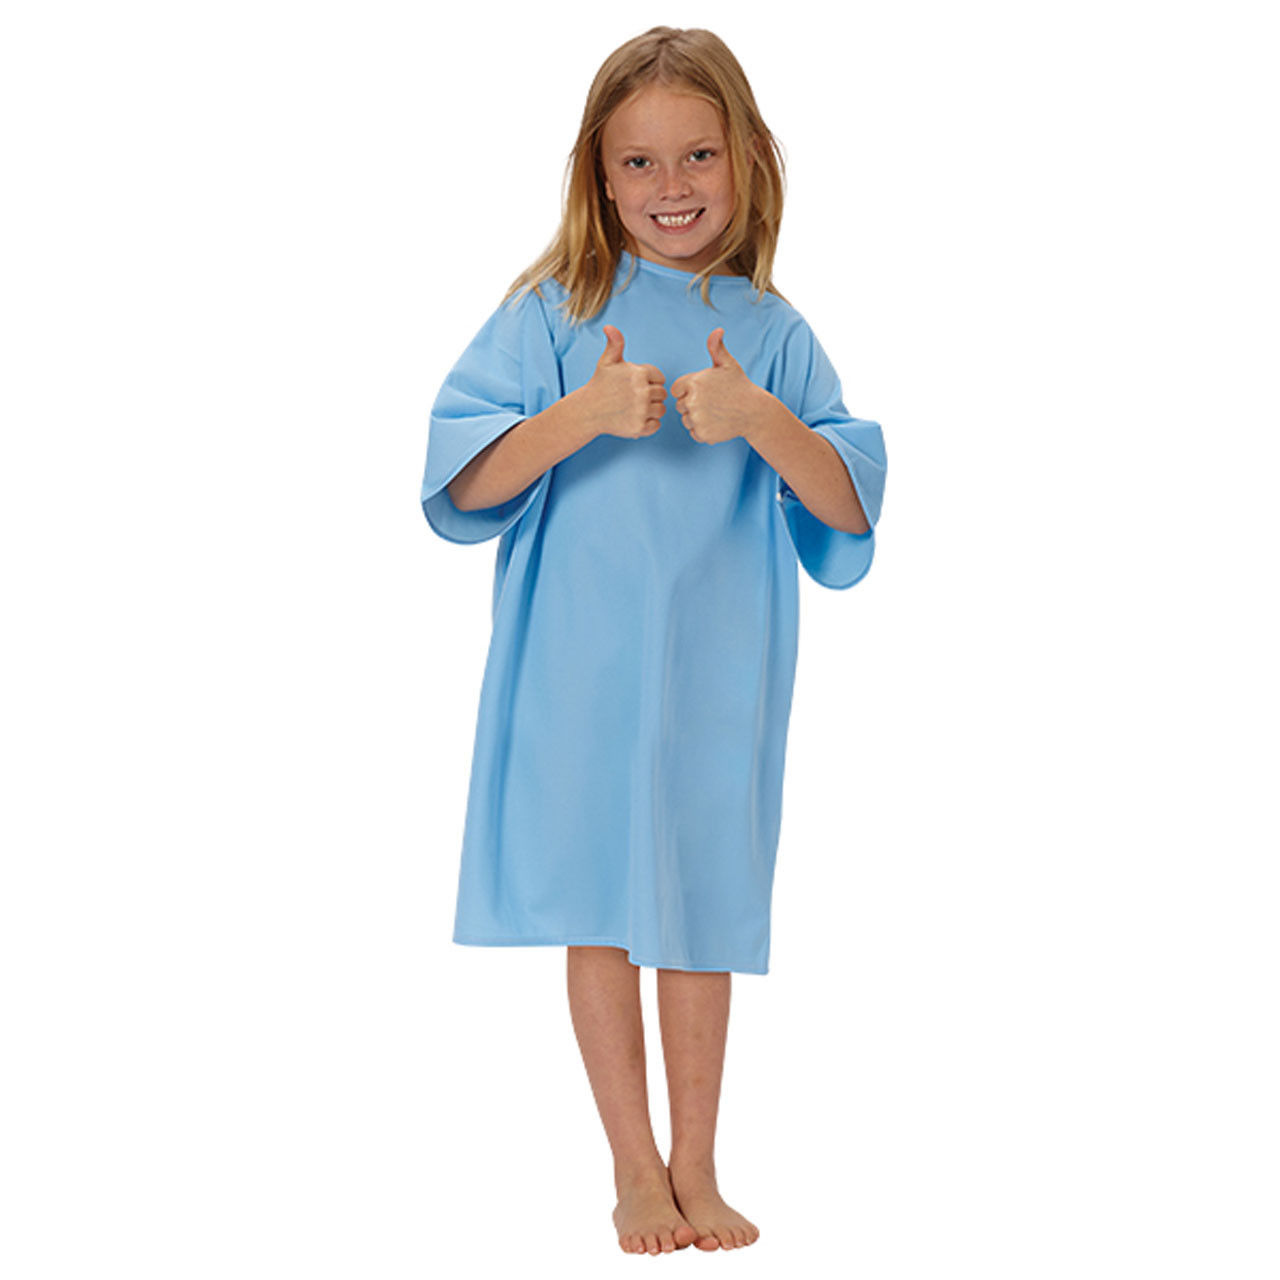 Does the sleeve design of the blue medical gown enhance comfort for kids?